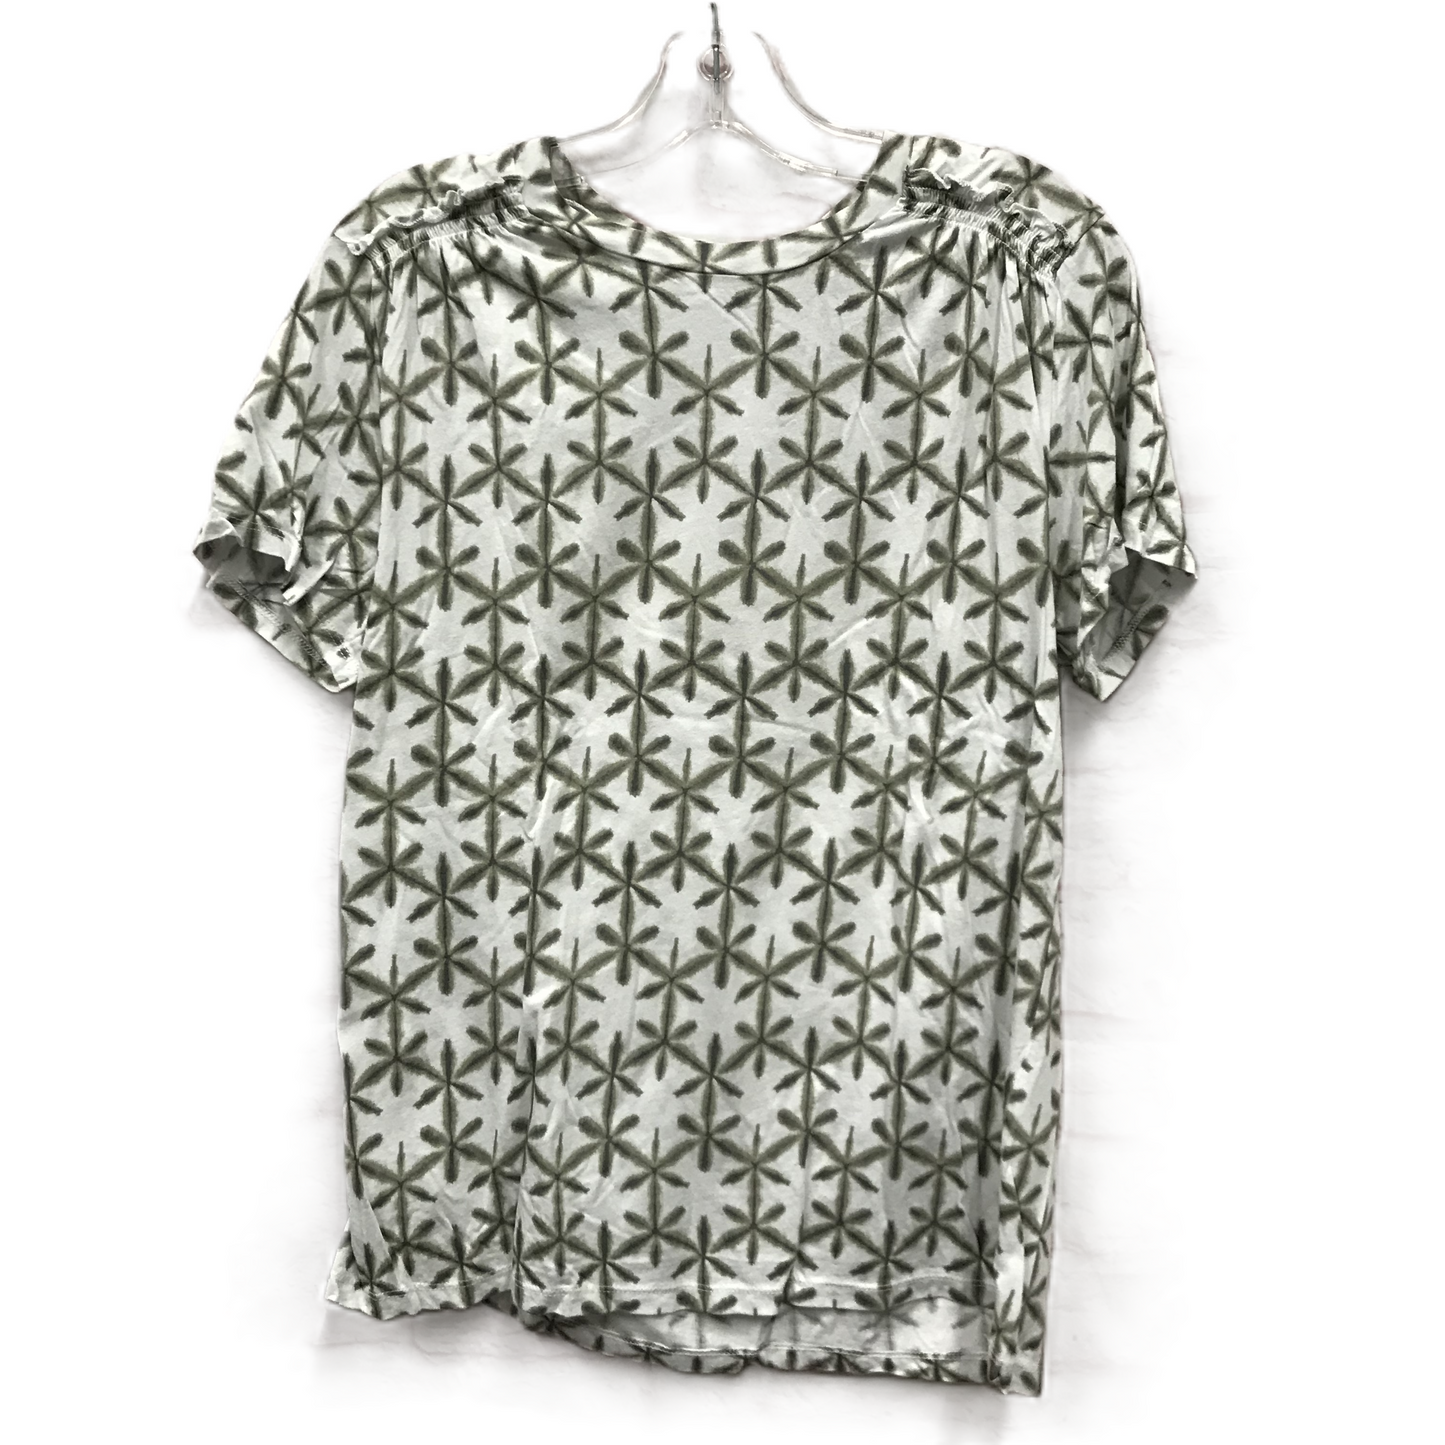 Green Top Short Sleeve By Loft, Size: L